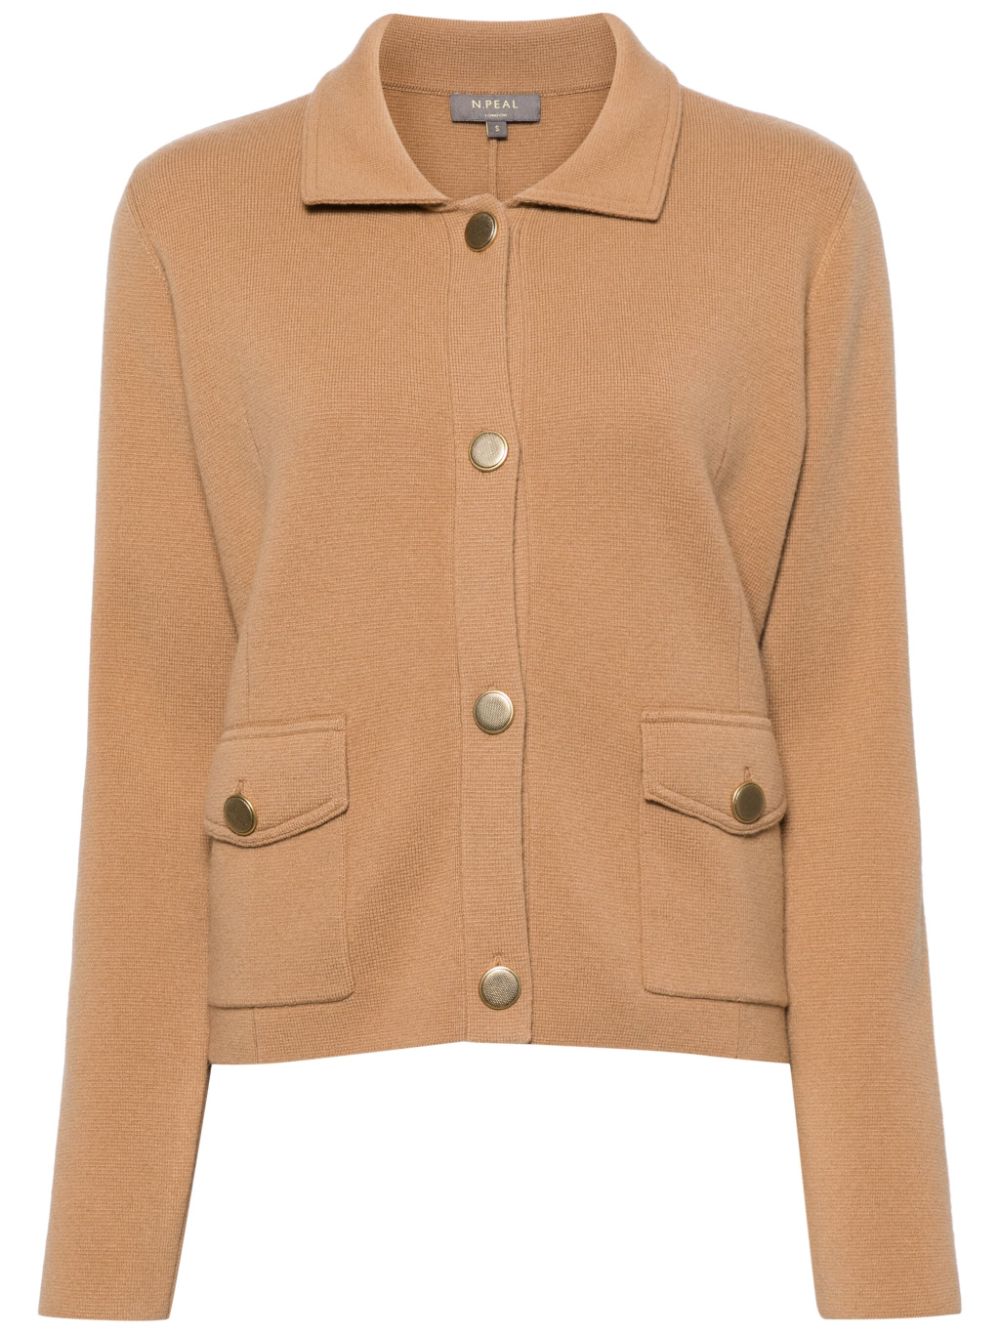 Image 1 of N.Peal Milano cashmere cropped jacket